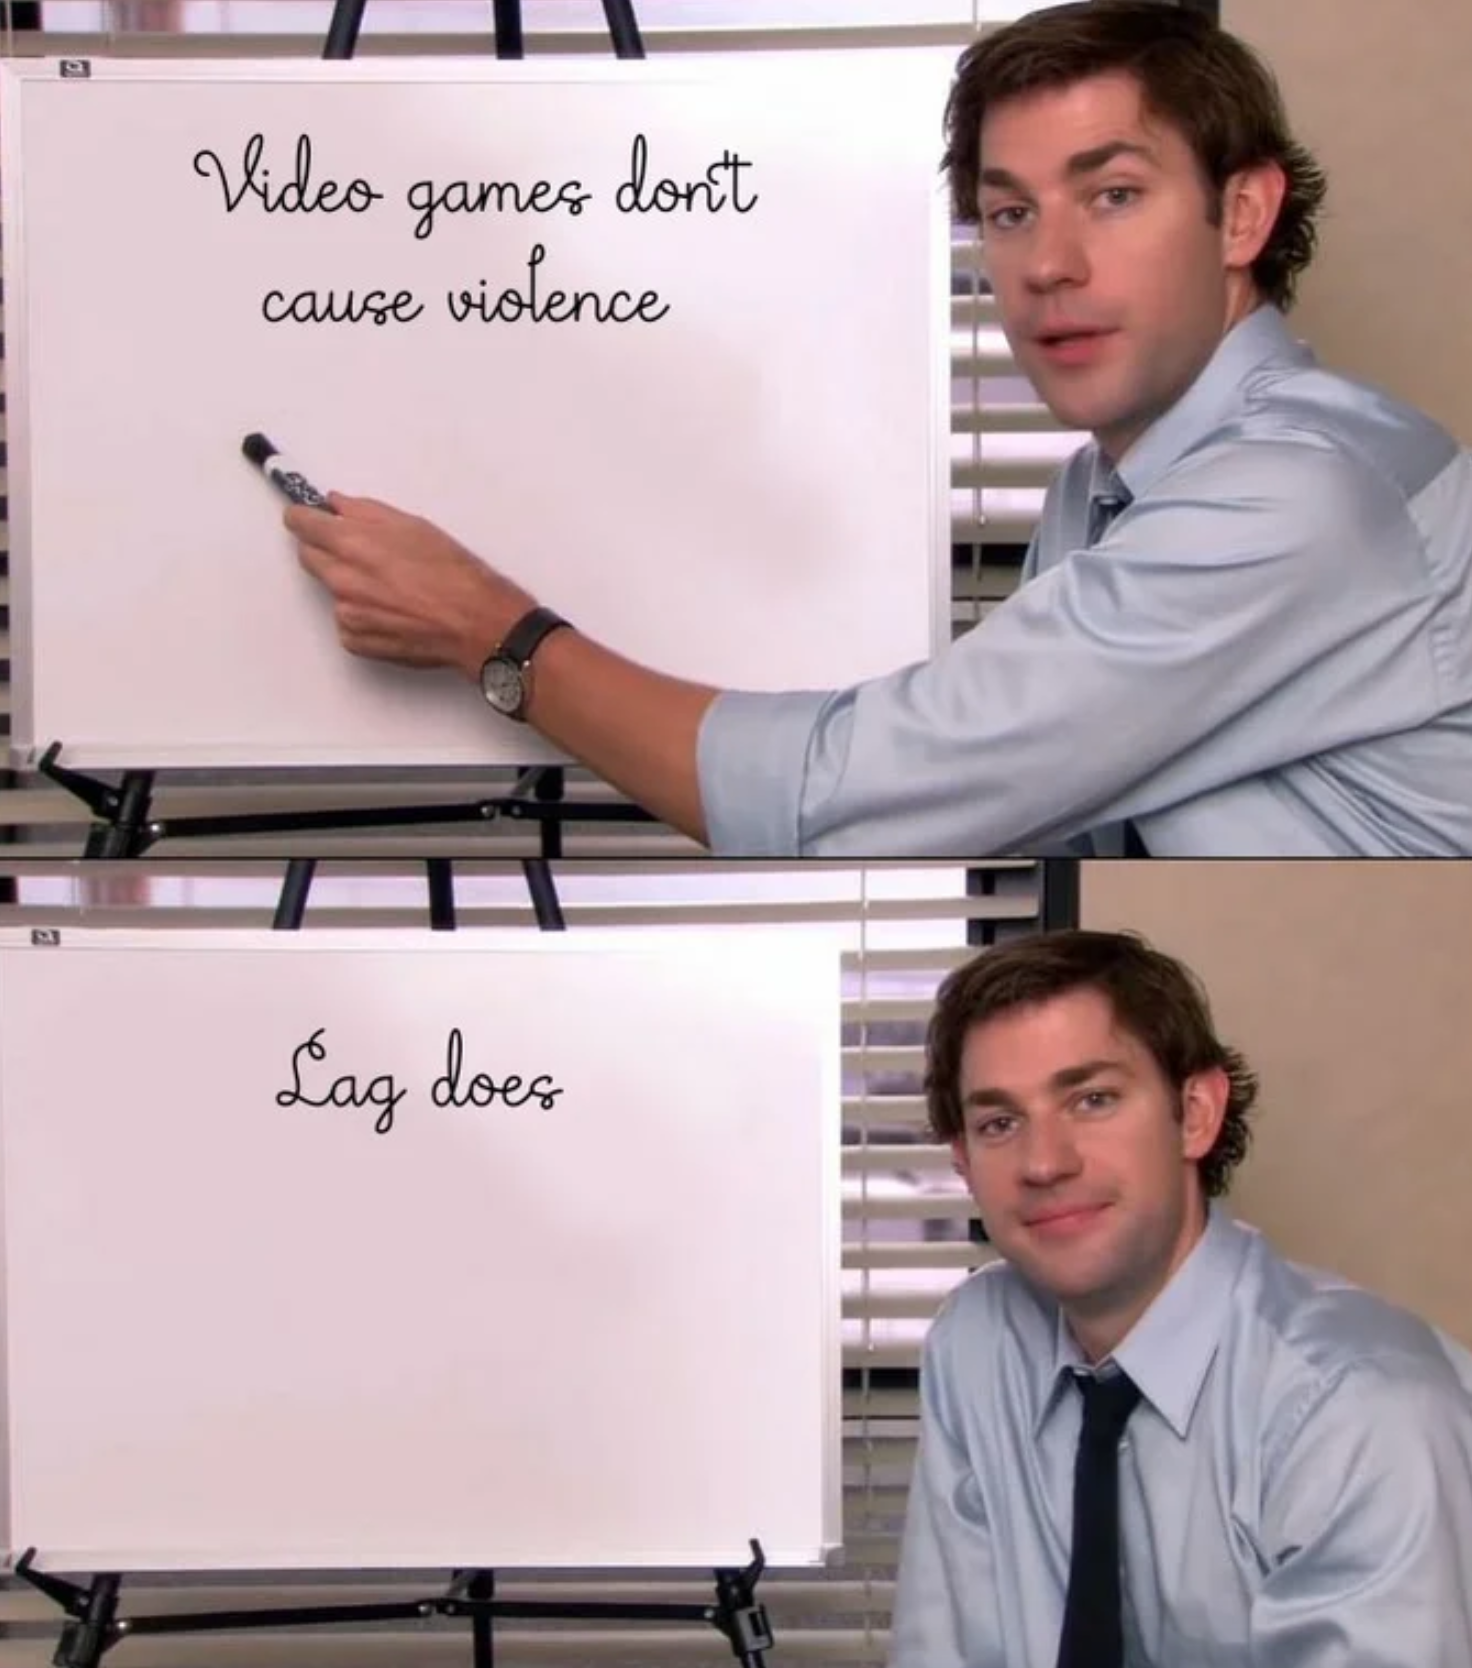 office quotes - Video games dont cause violence Lag does